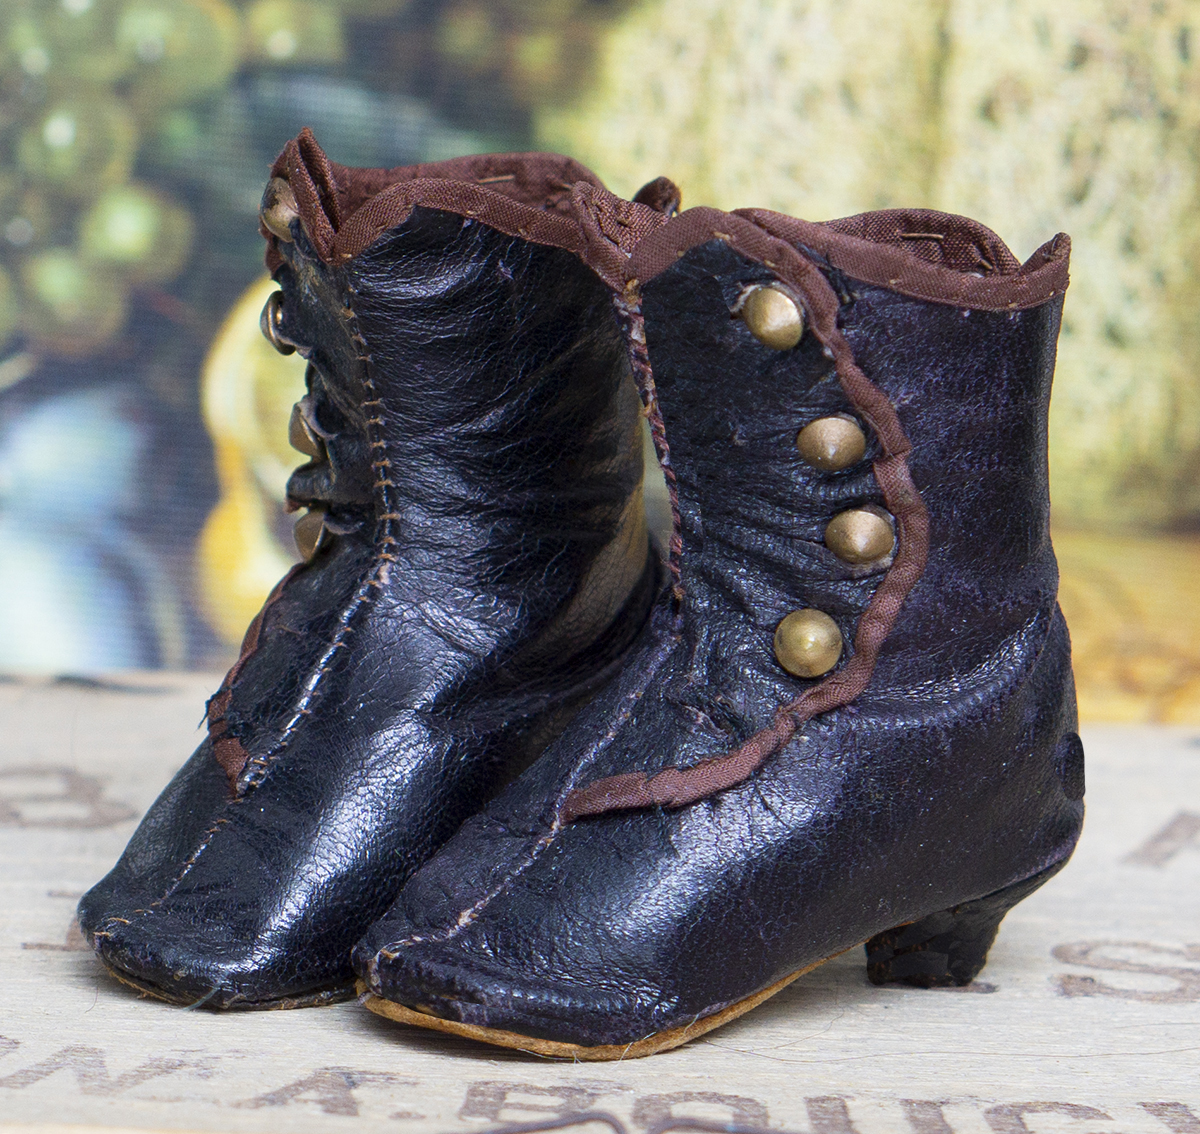 ANTIQUE DOLL BOOTS